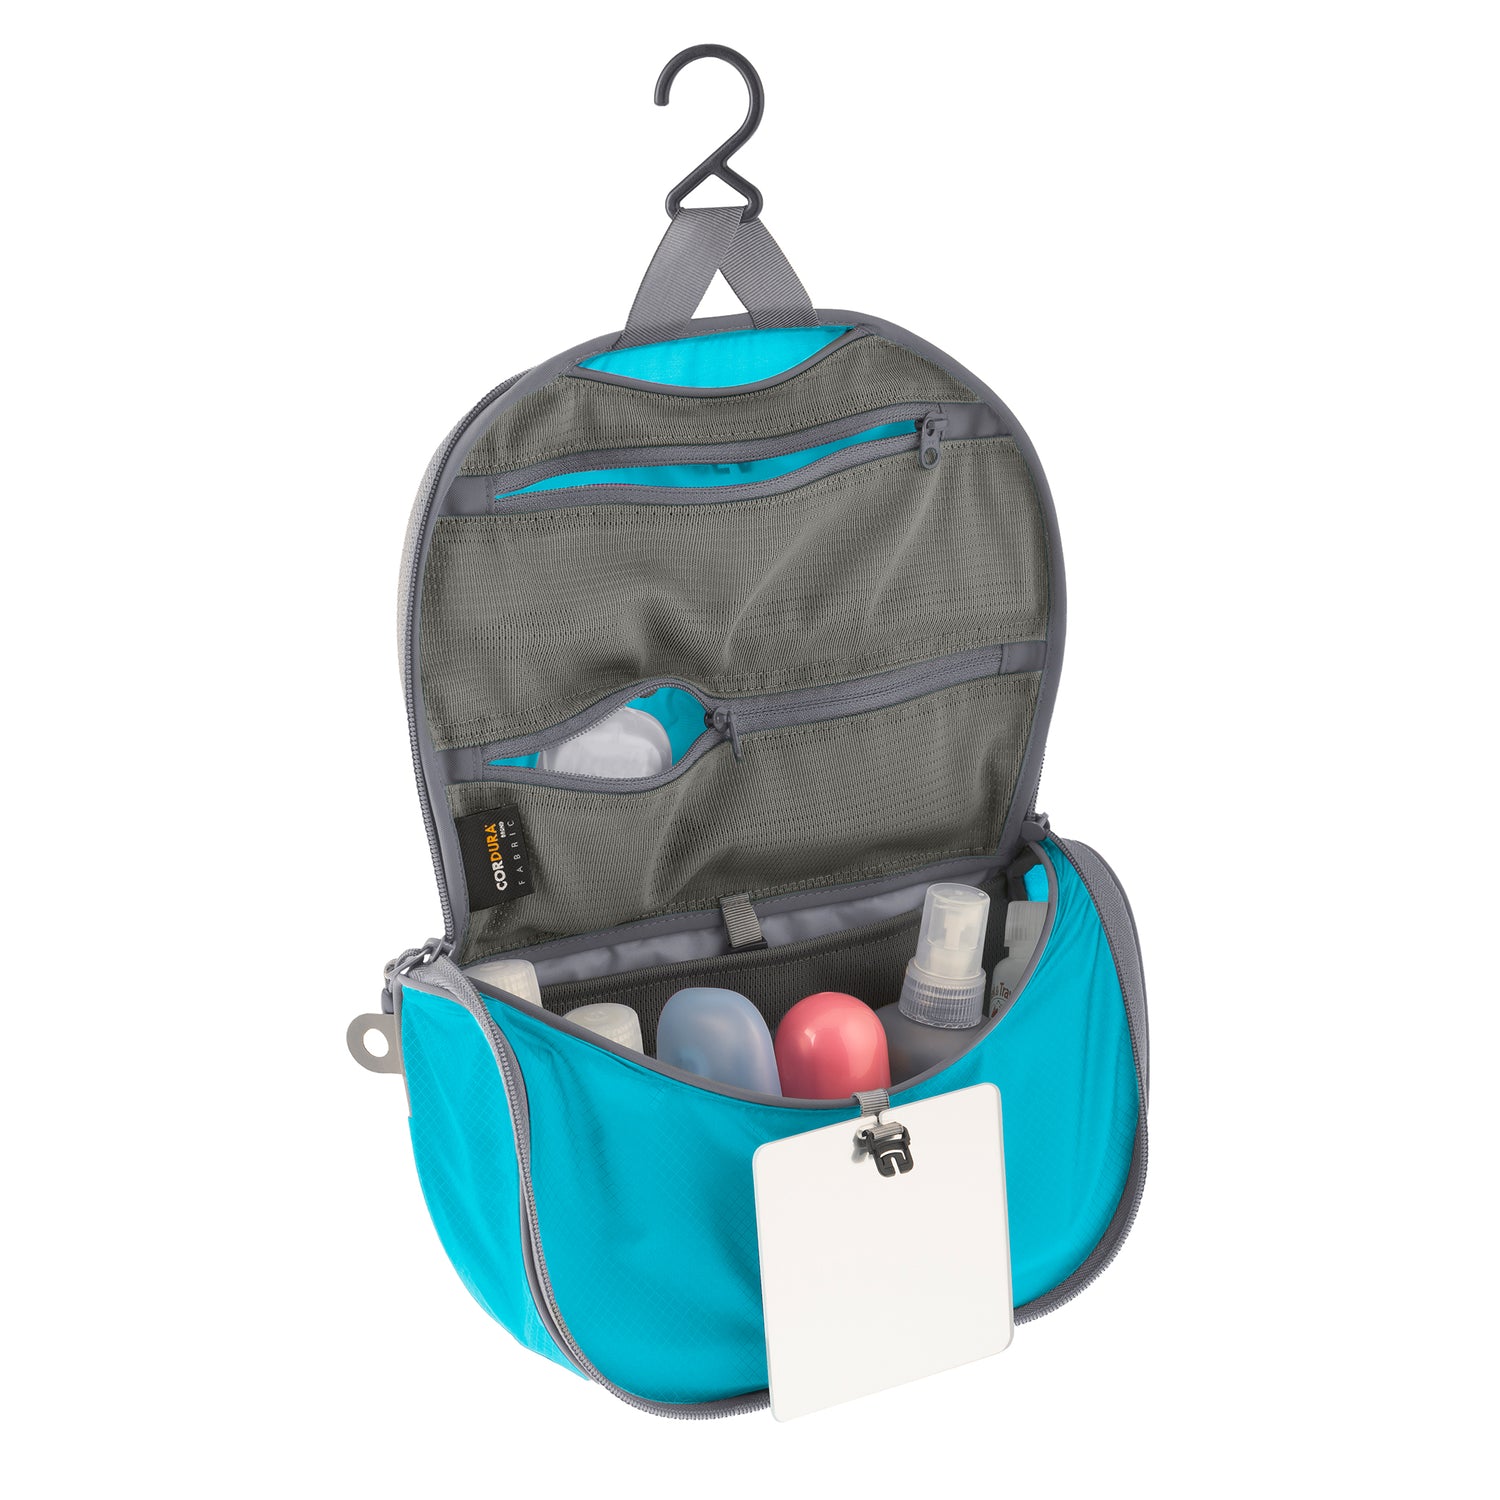 Sea to Summit Hanging Toiletry Bag - Small